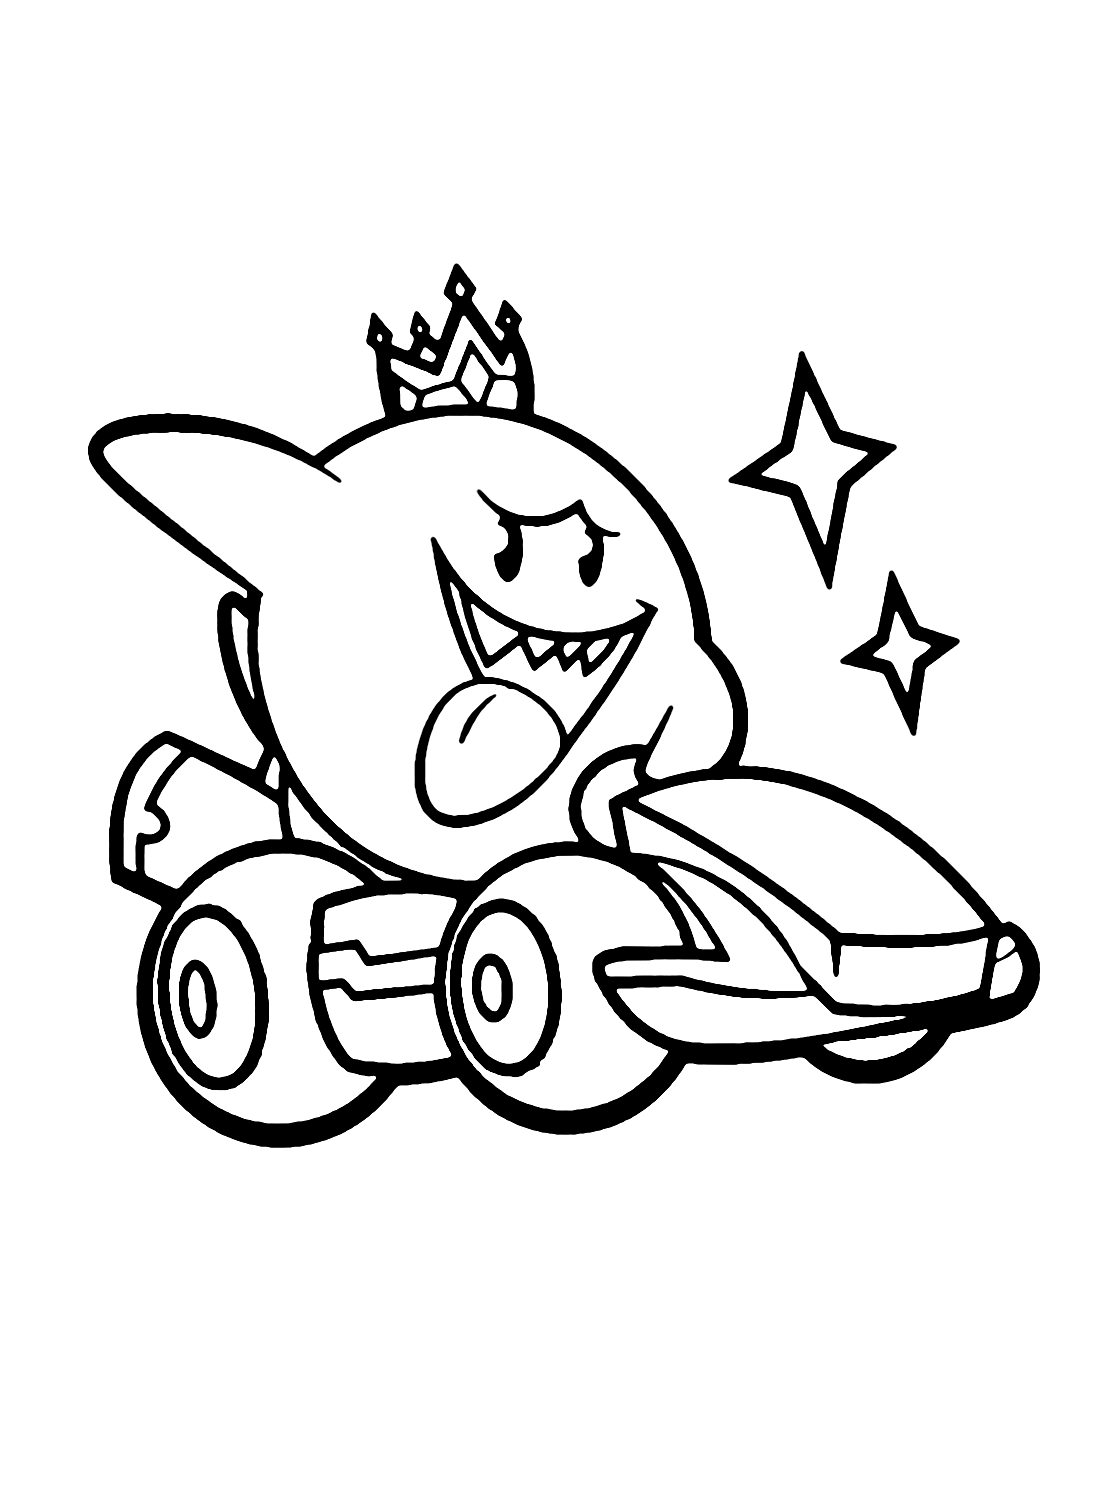 King Boo with Car Coloring Pages